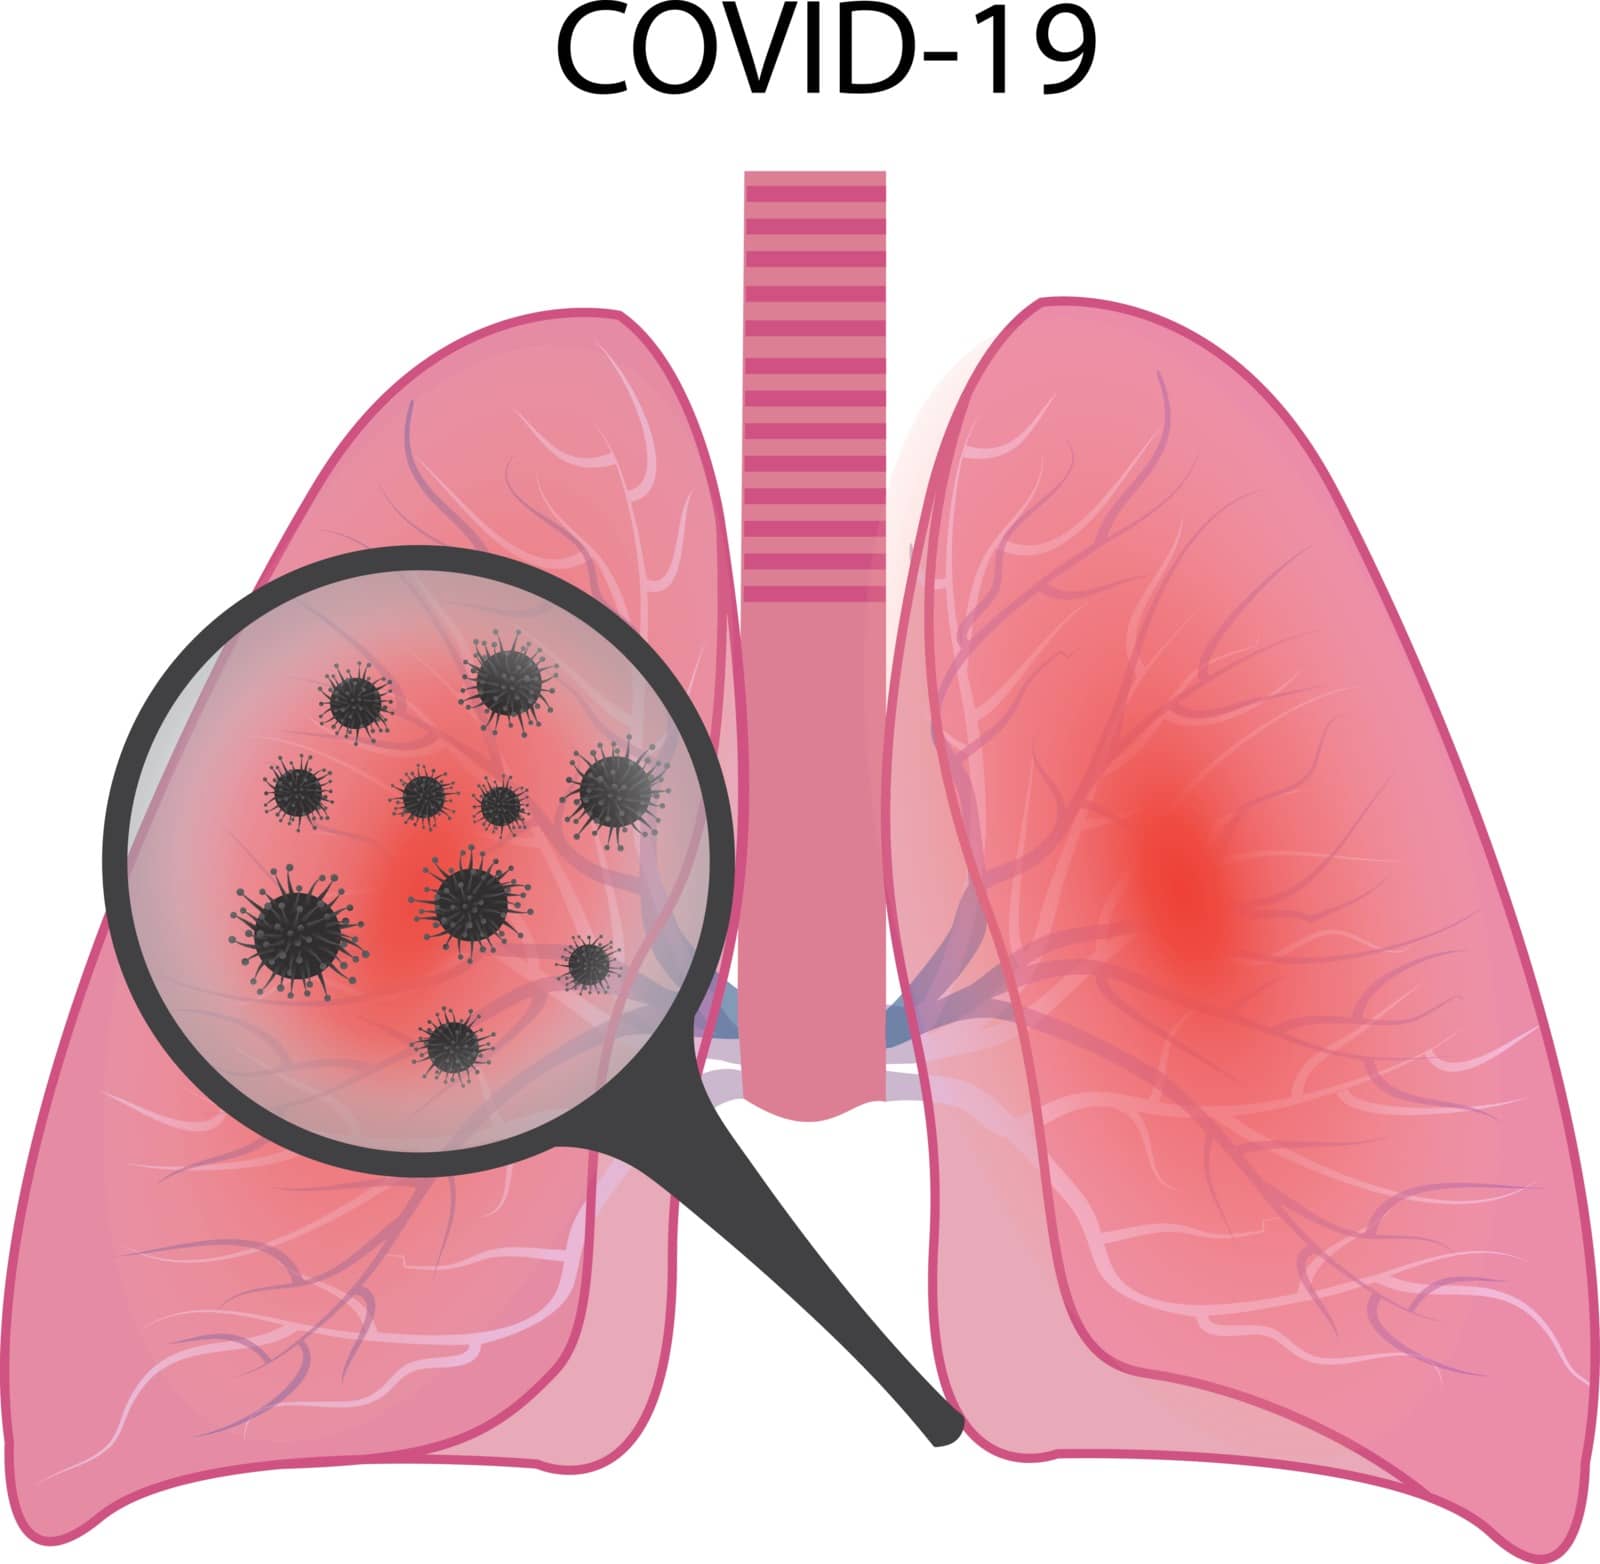 Lungs affected with coronavirus infection COVID19 vector illustration isolated on a white background